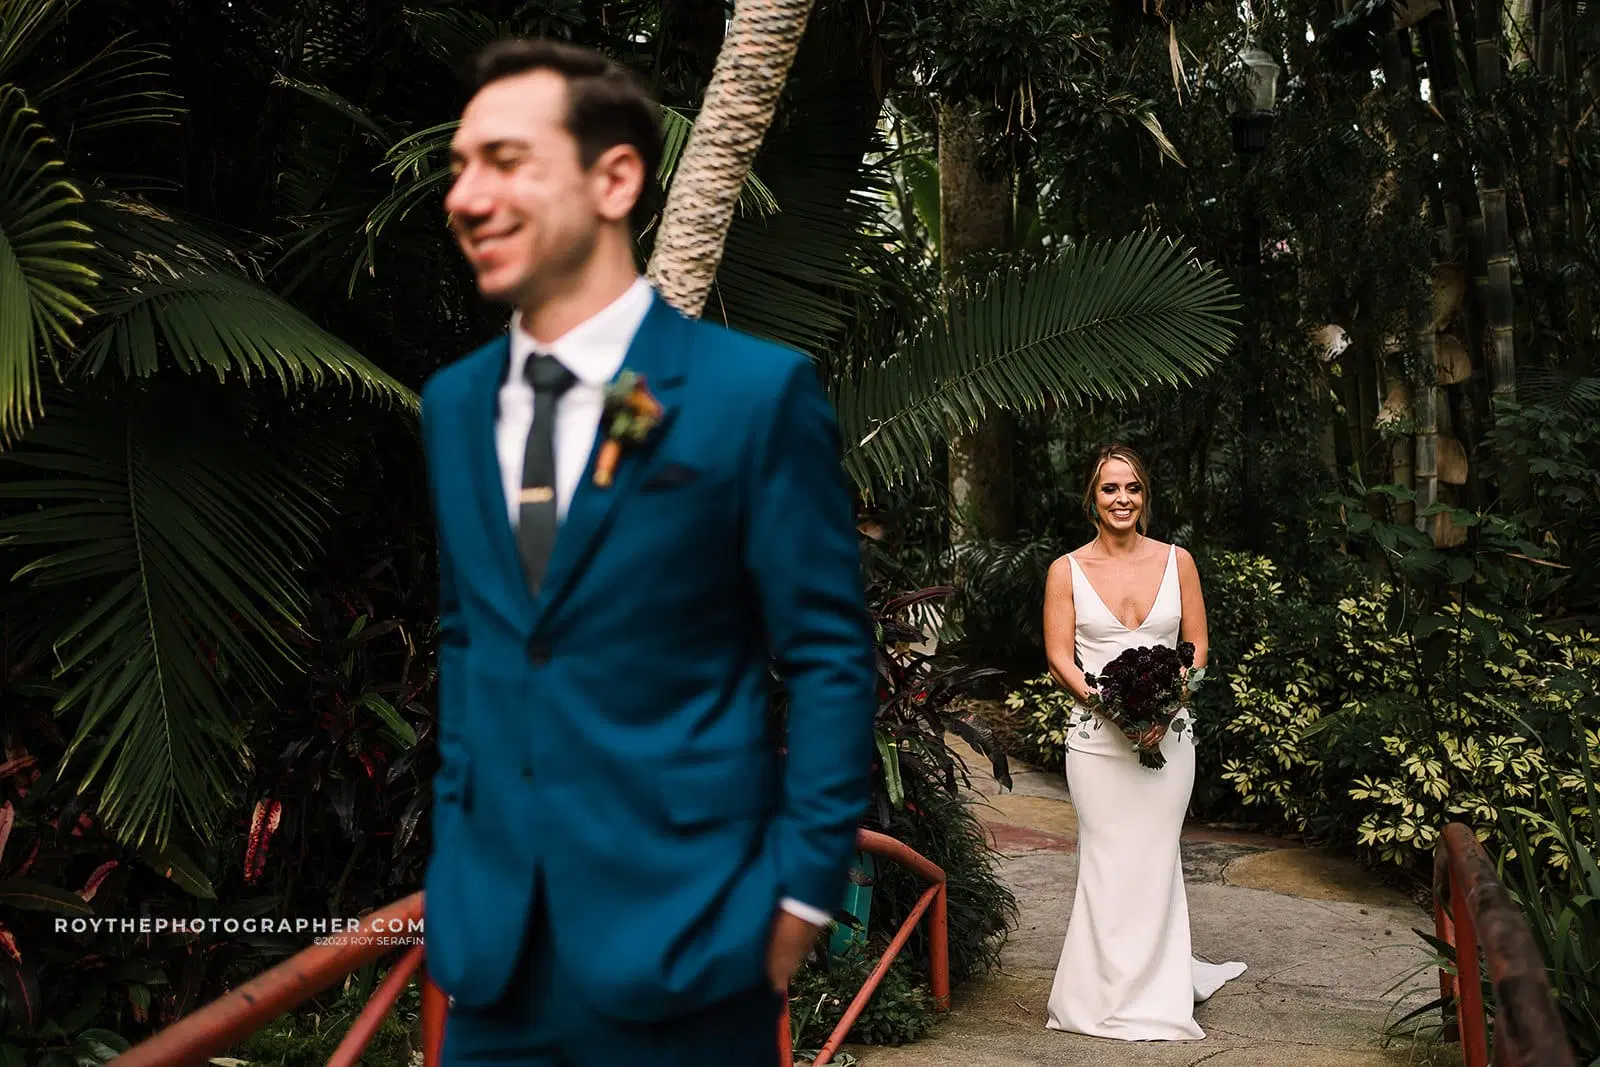 A bride beams with happiness as she looks at her groom, who stands in the foreground, out of focus, at their Sunken Gardens wedding, with lush greenery surrounding them.